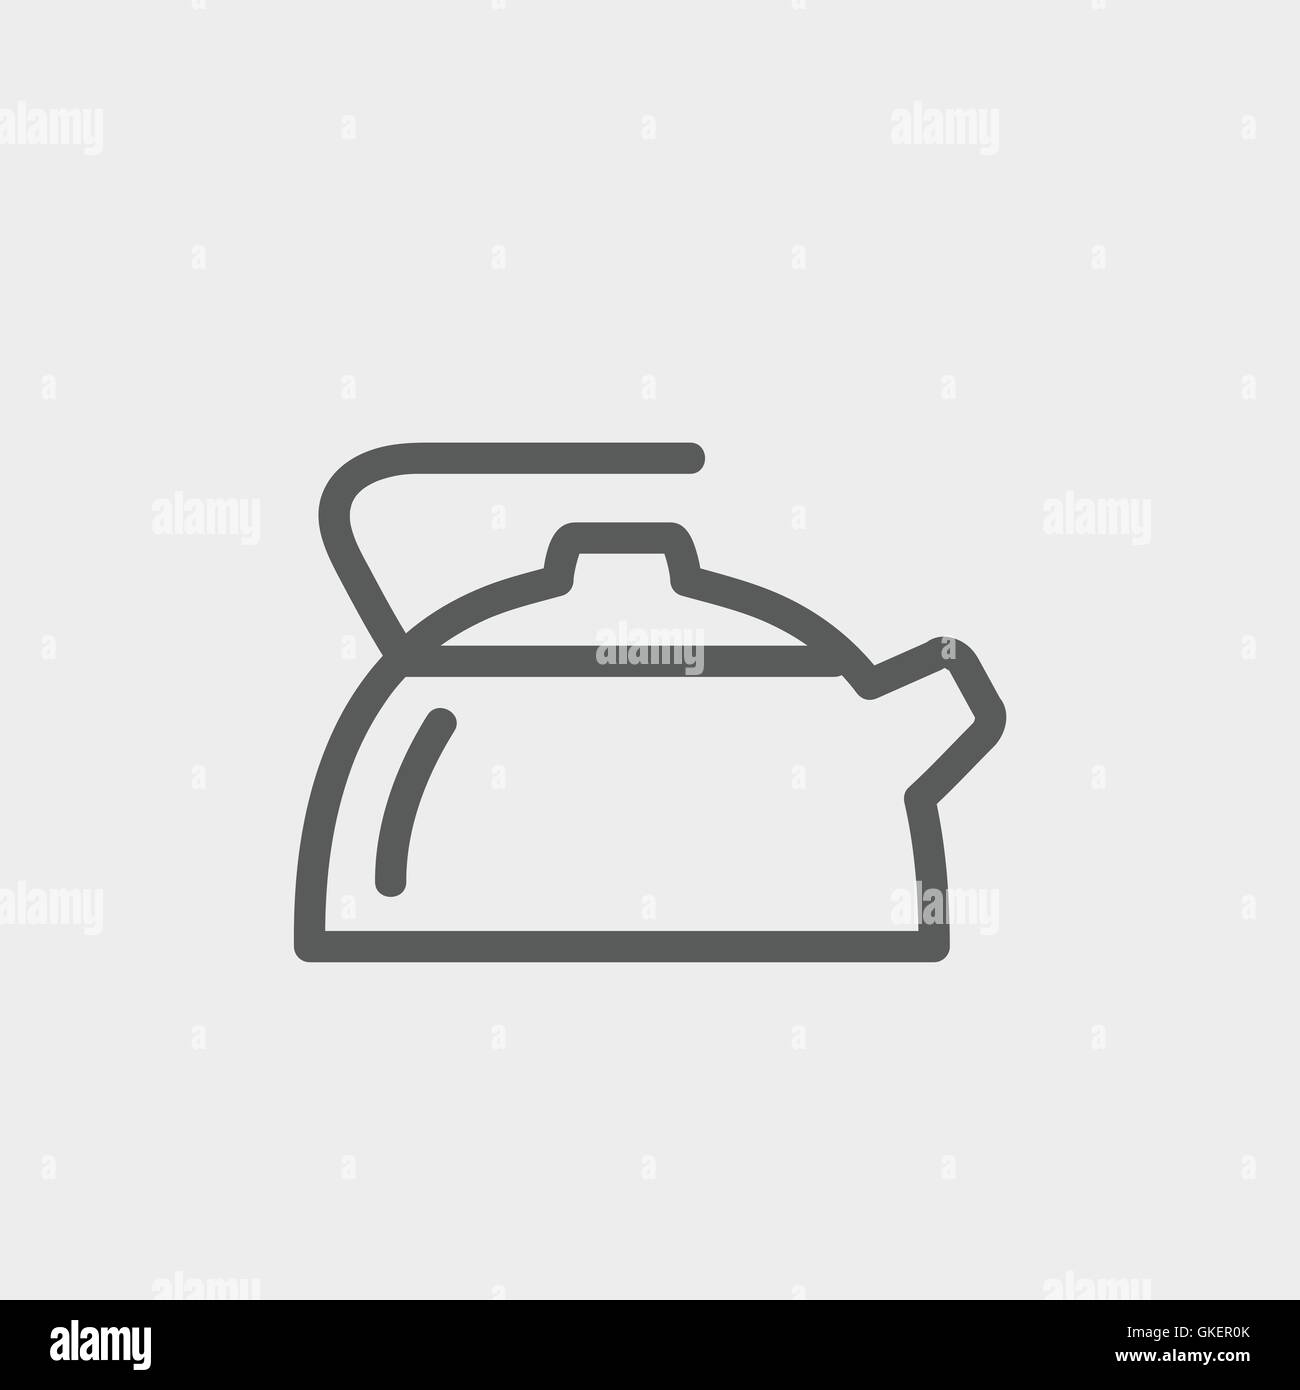 Kettle thin line icon Stock Vector